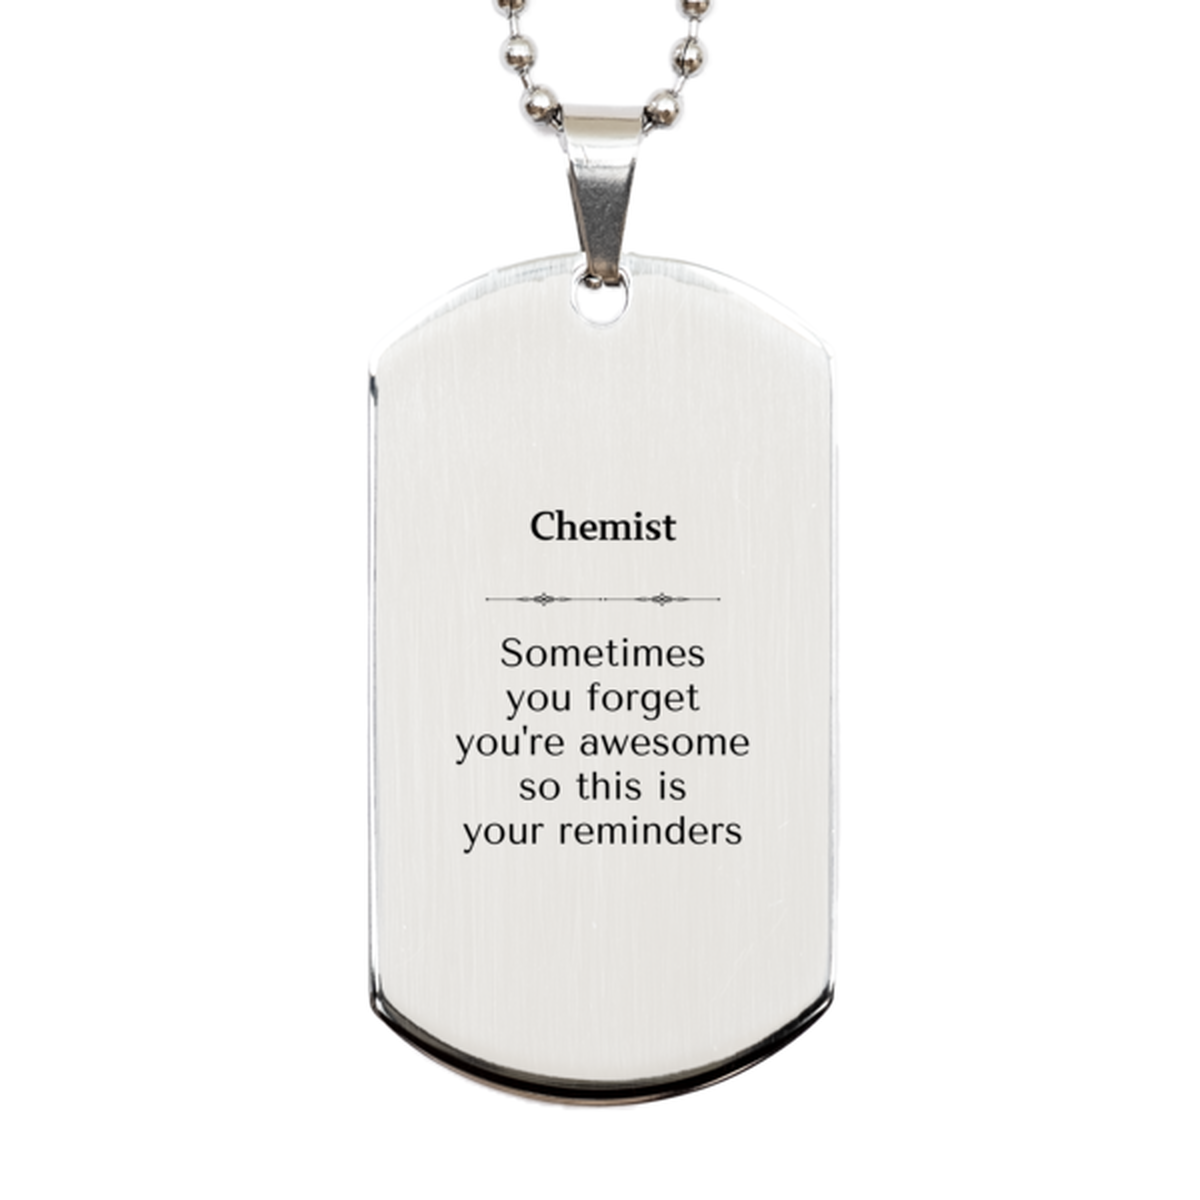 Sentimental Chemist Silver Dog Tag, Chemist Sometimes you forget you're awesome so this is your reminders, Graduation Christmas Birthday Gifts for Chemist, Men, Women, Coworkers